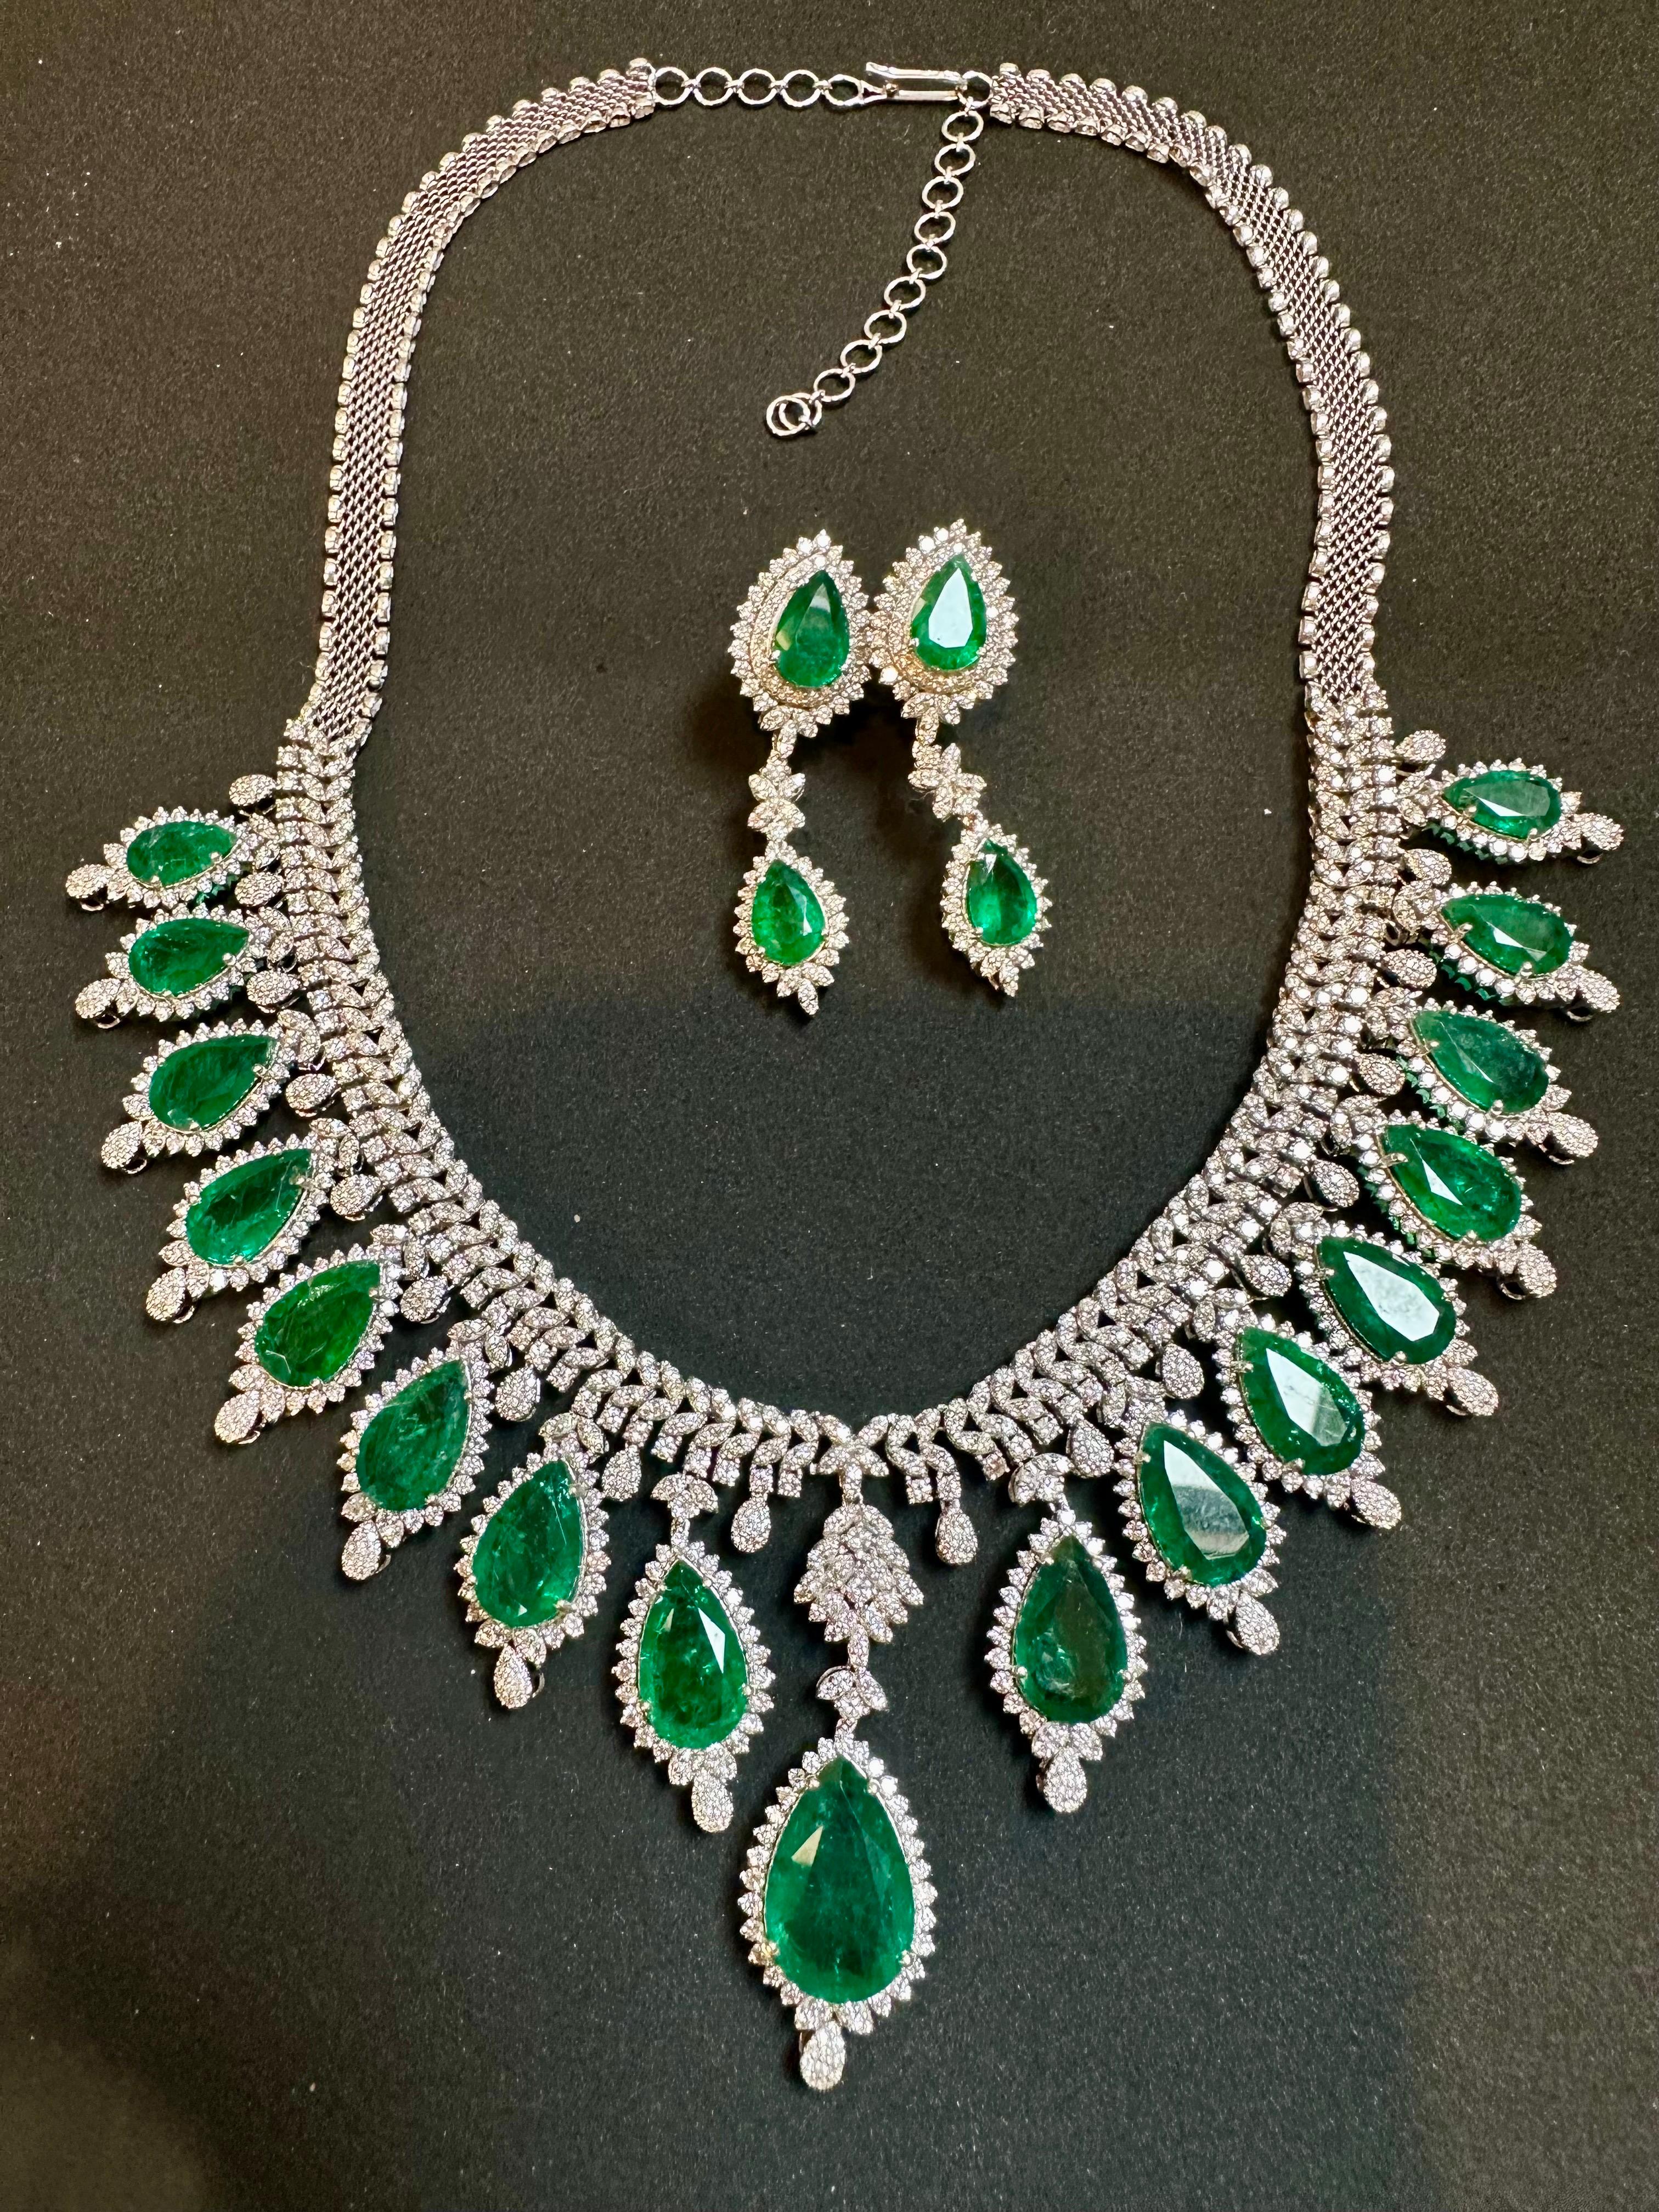 73ct Zambian Emerald and 22ct Diamond Necklace and Earring Bridal Suite For Sale 4